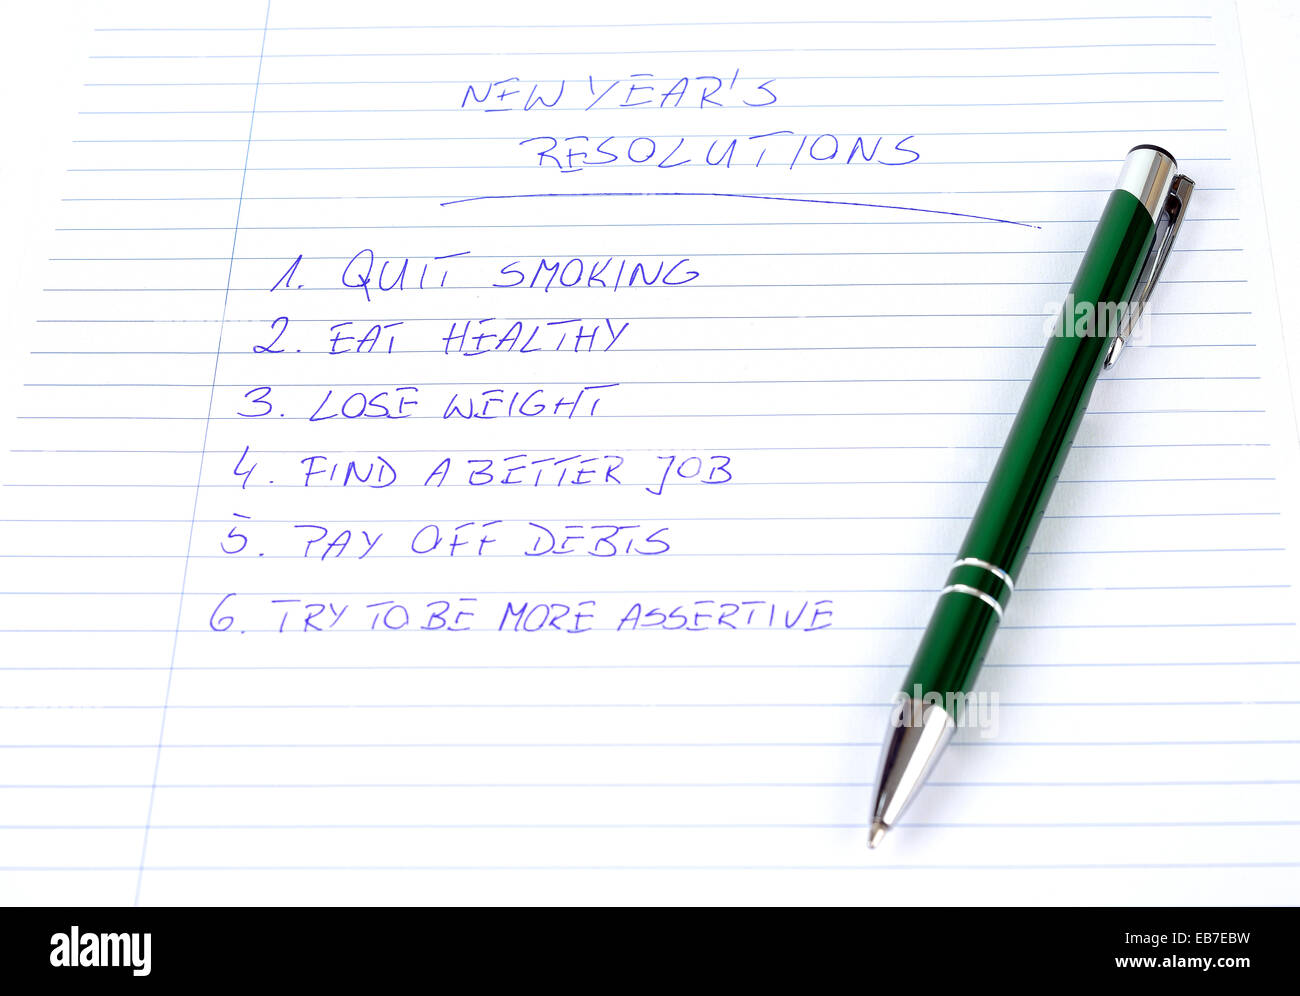 New Year's resolutions listed on the piece of paper Stock Photo